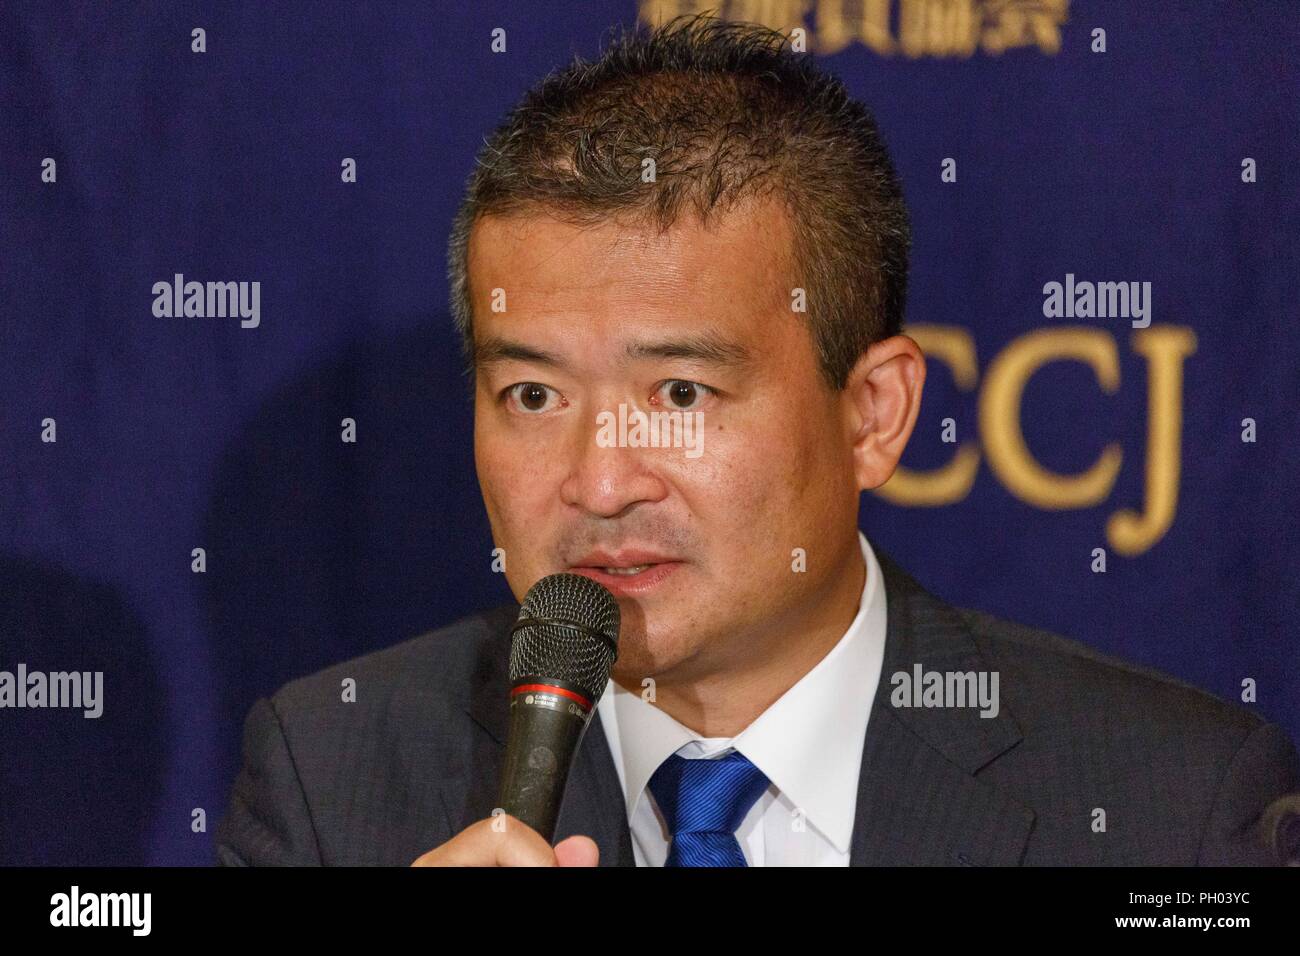 Tokyo, Japan. 29th Aug 2018. Japanese politician and candidate for his party's leadership Keisuke Tsumura speaks during a news conference at the Foreign Correspondents' Club of Japan on August 29, 2018, Tokyo, Japan. Tsumura and Yuichiro Tamaki answered questions about the coming leadership election for the Democratic Party For the People, which is set for September 4. Credit: Rodrigo Reyes Marin/AFLO/Alamy Live News Stock Photo